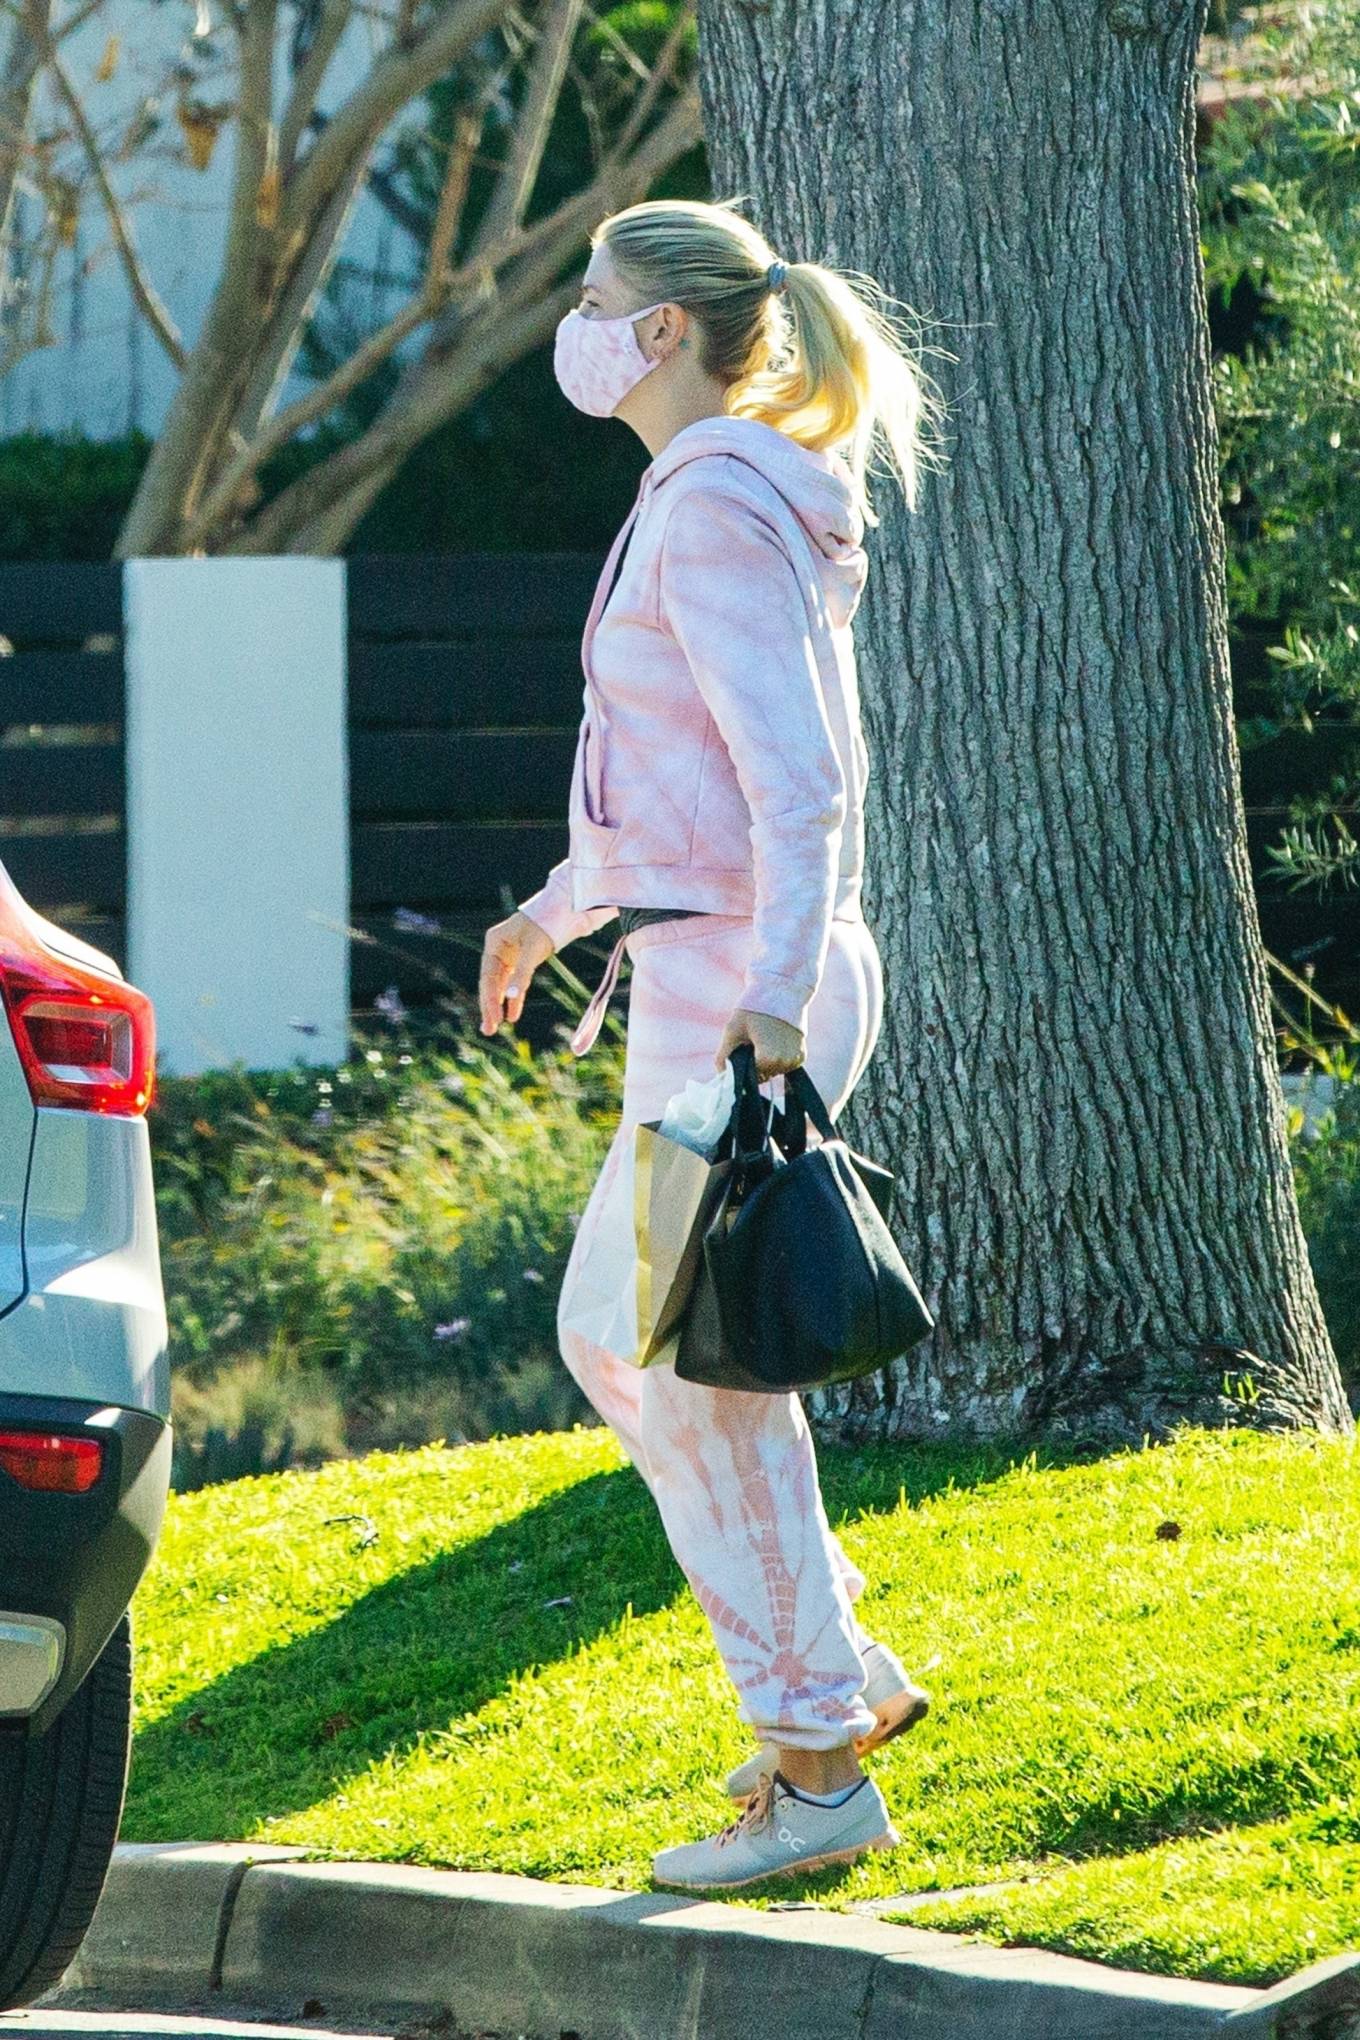 Amanda Kloots - Spotted while arriving at a child’s birthday party in LA.